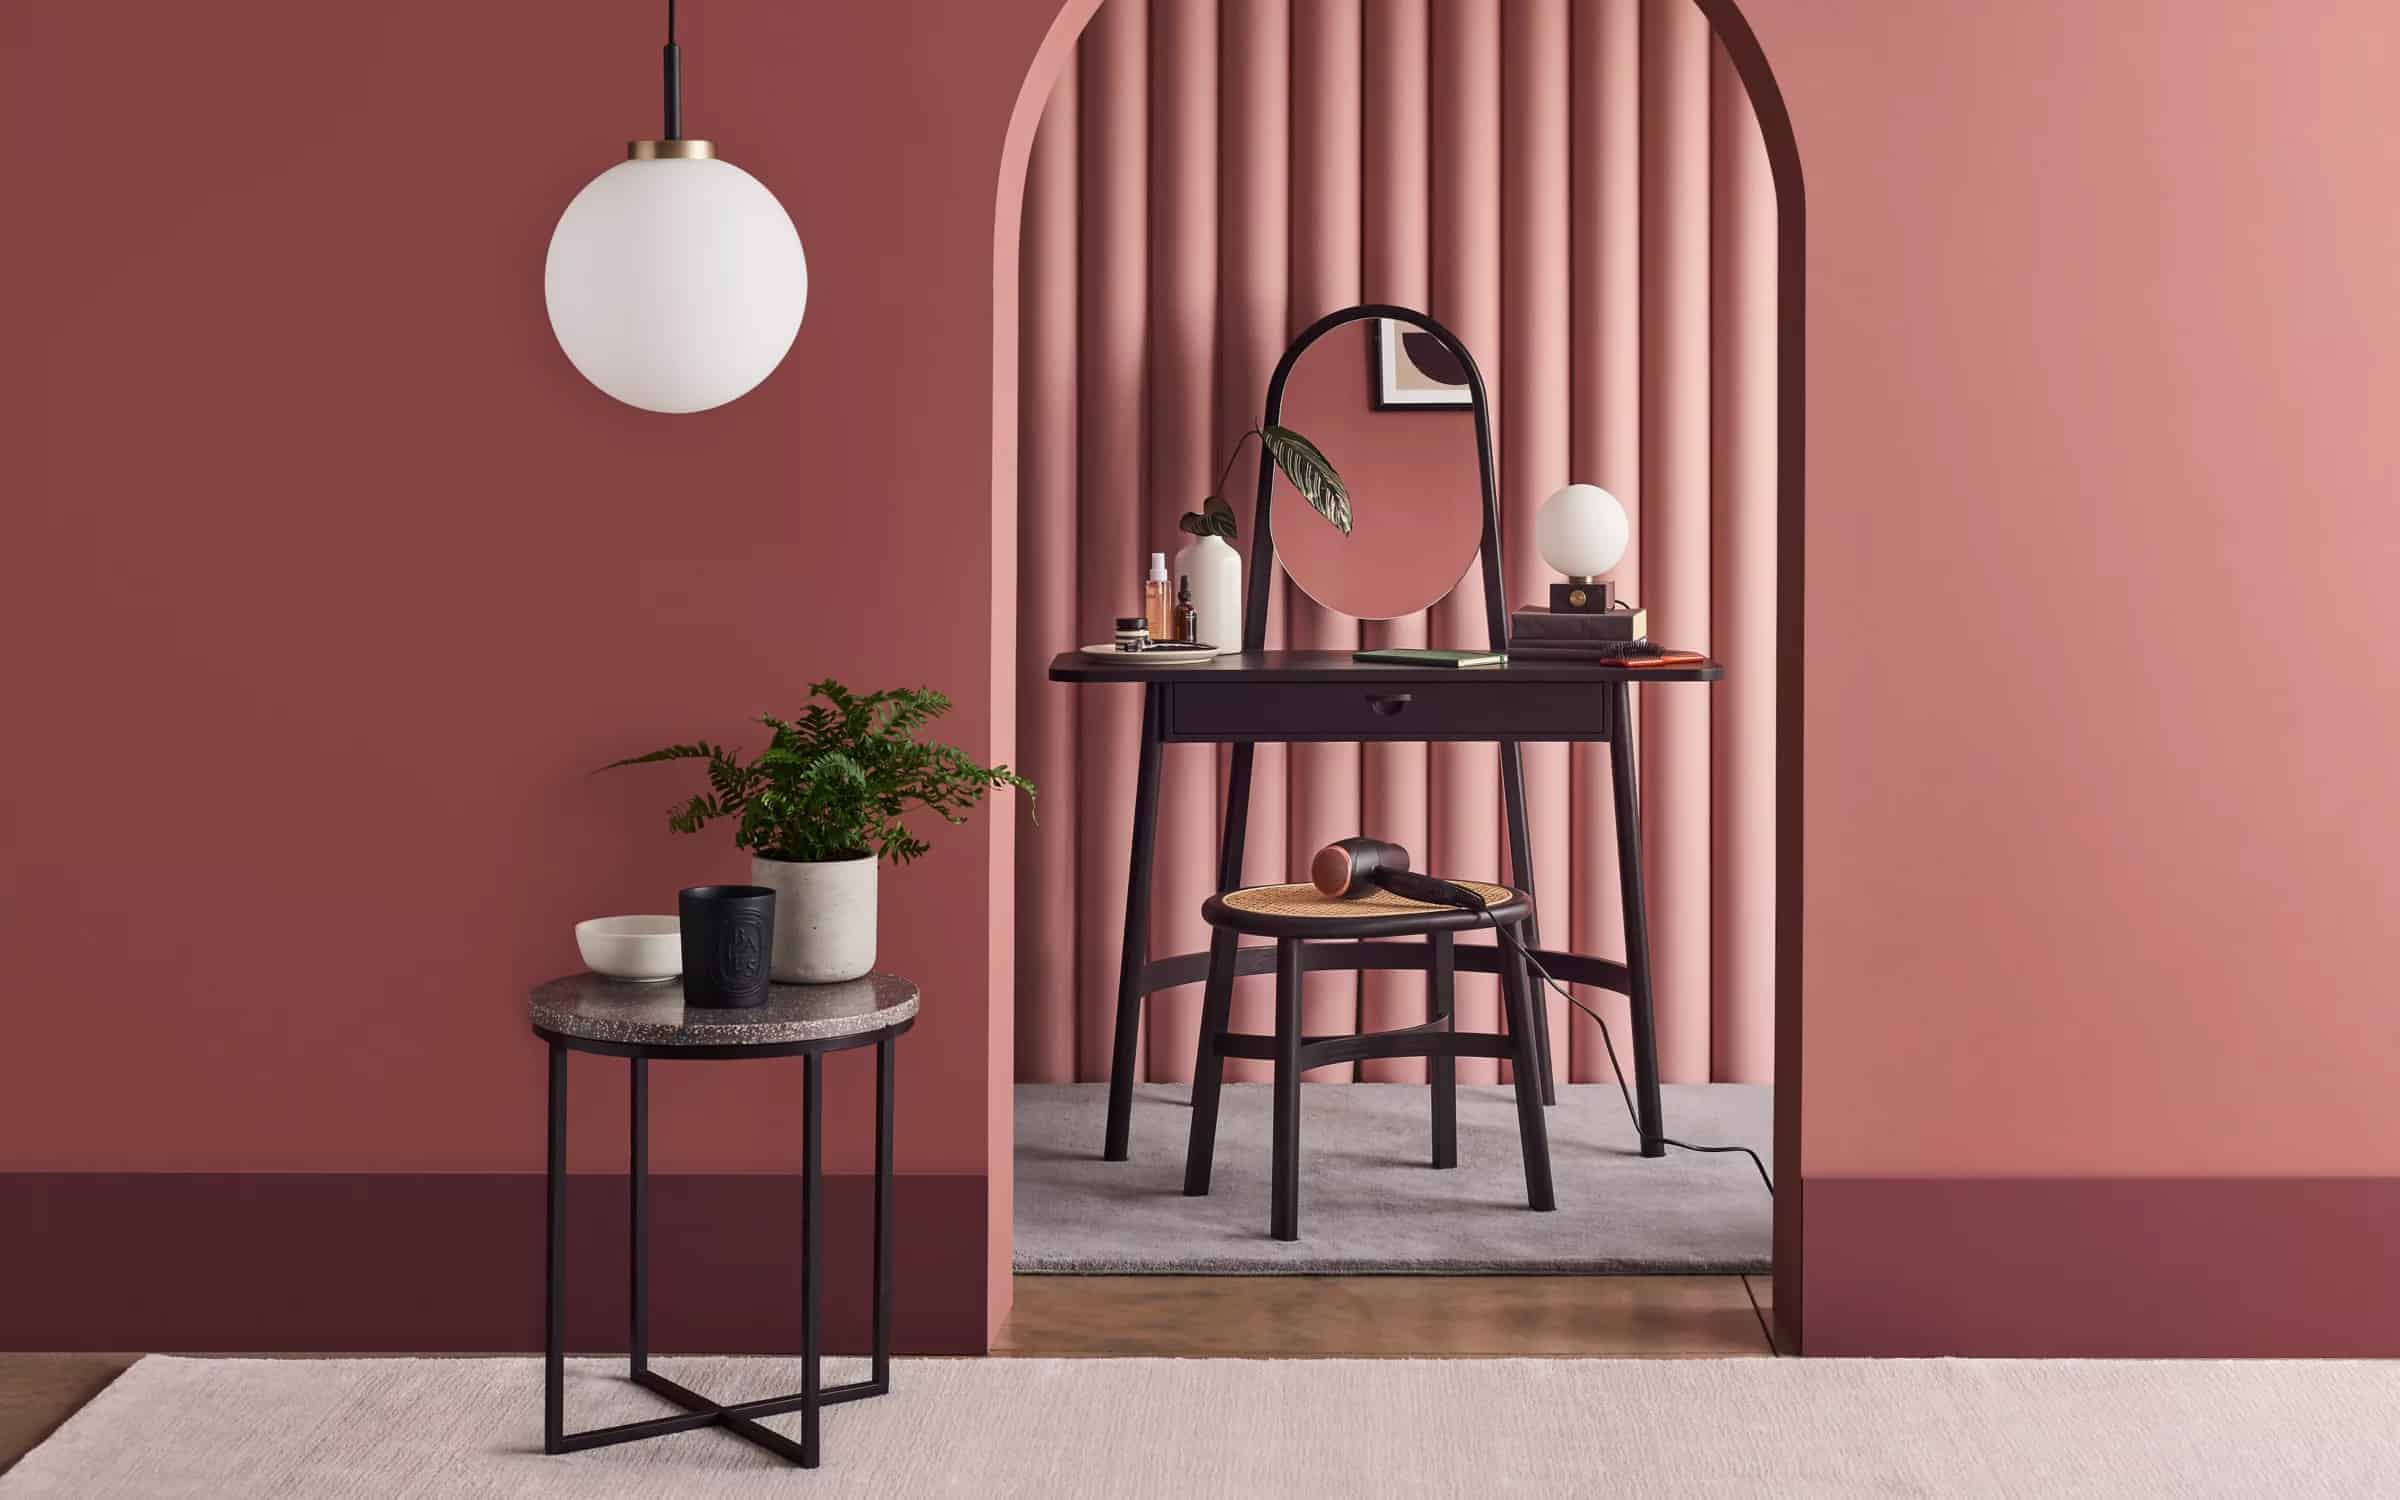 A pretty black color dressing table design with a oval mirror, minimum storage space, and a matching stool, in a pink room.